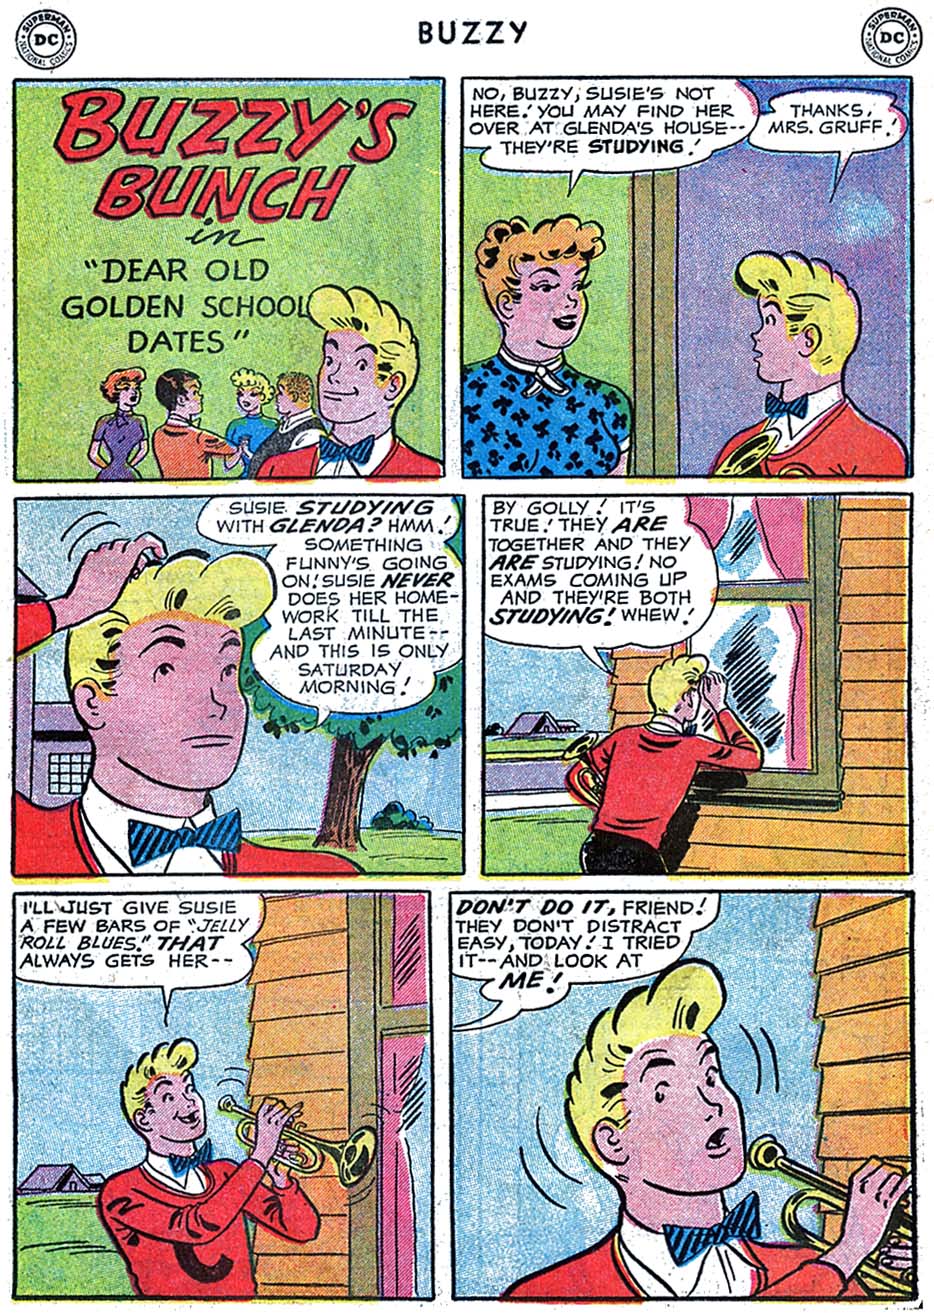 Read online Buzzy comic -  Issue #70 - 15